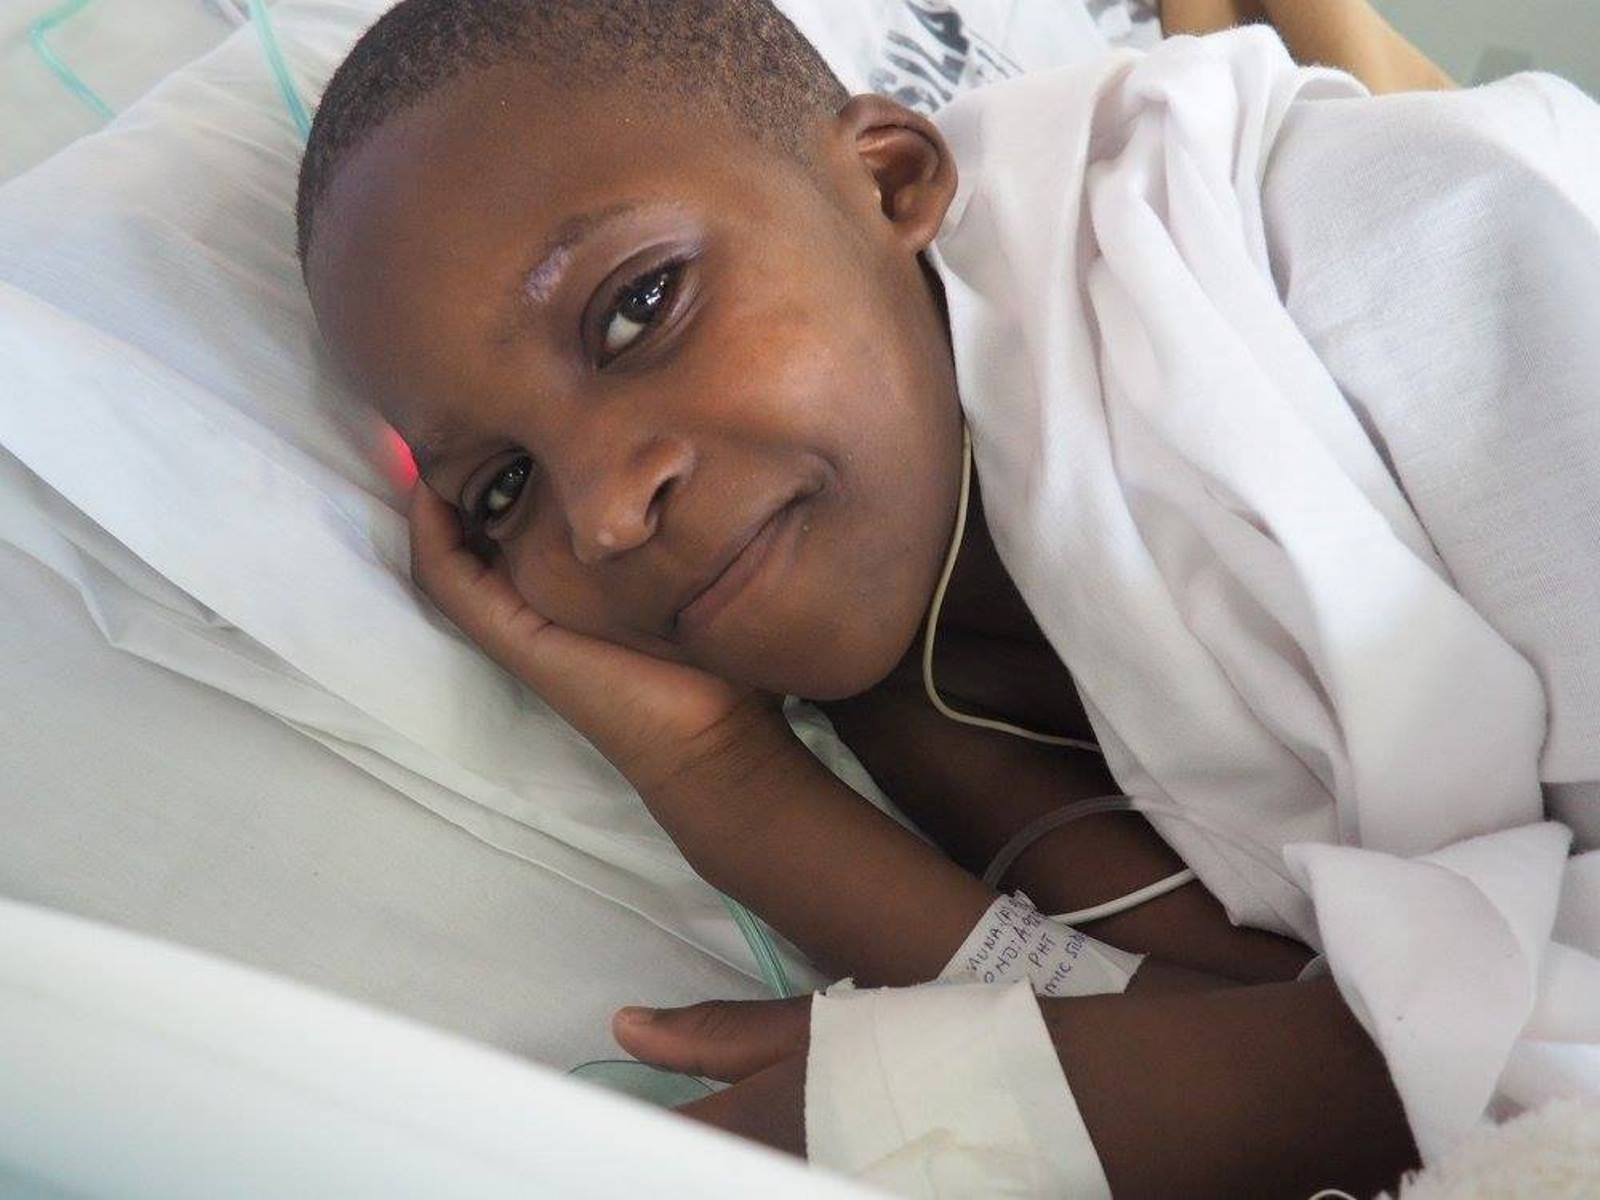 Zahara was the first catheterization patient of the March 2016 SACH mission to Tanzania. Photo courtesy of SACH